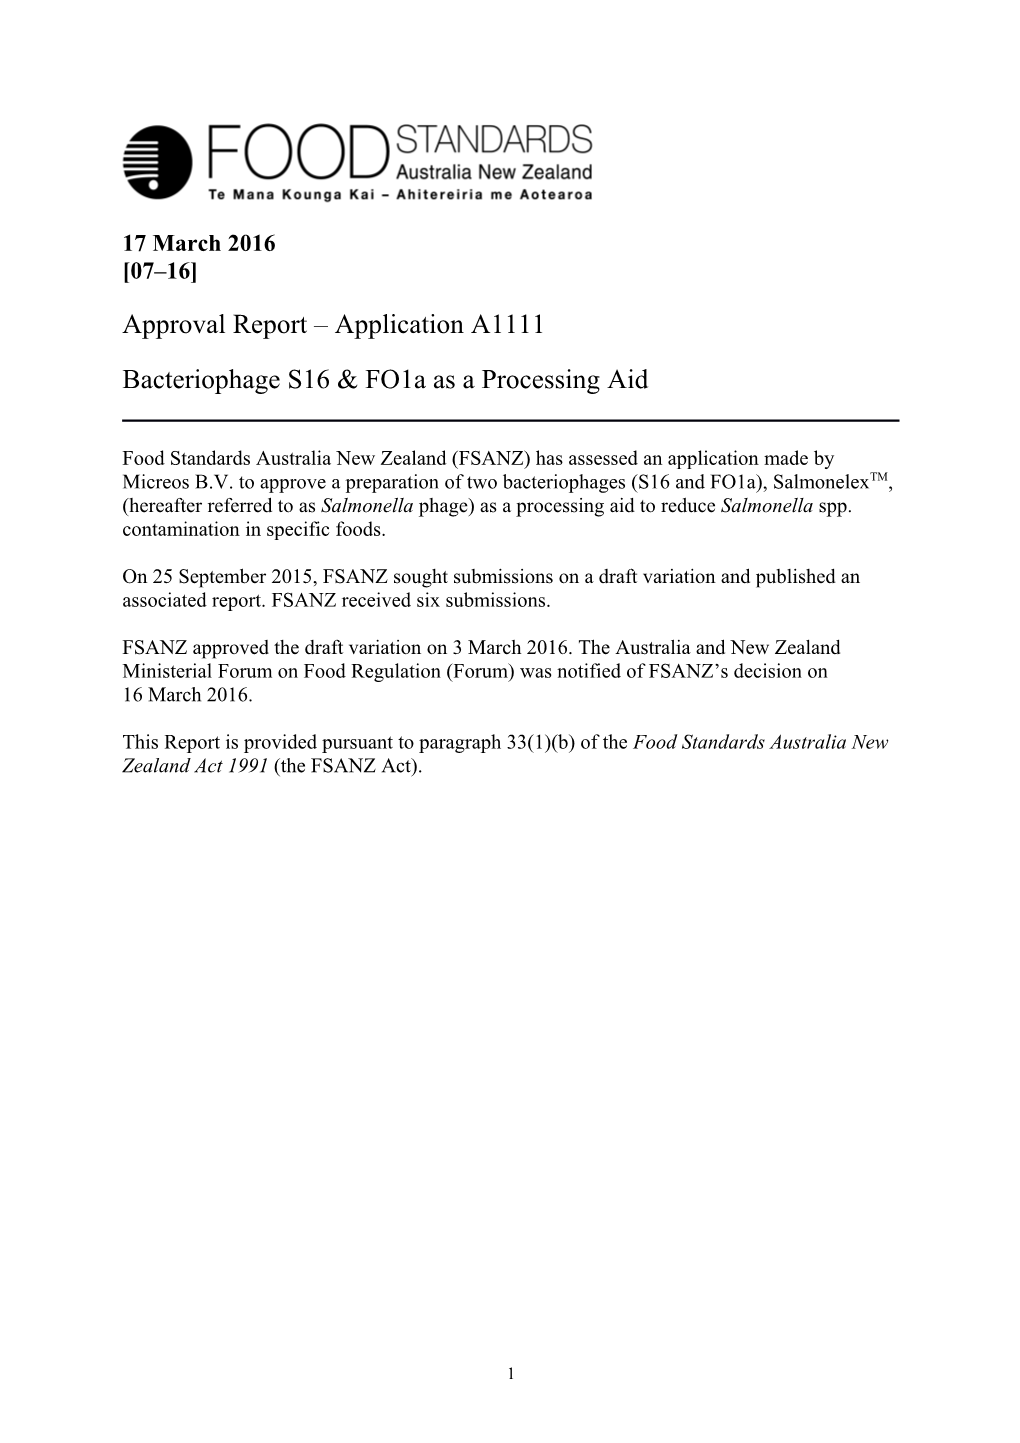 Approval Report Application A1111